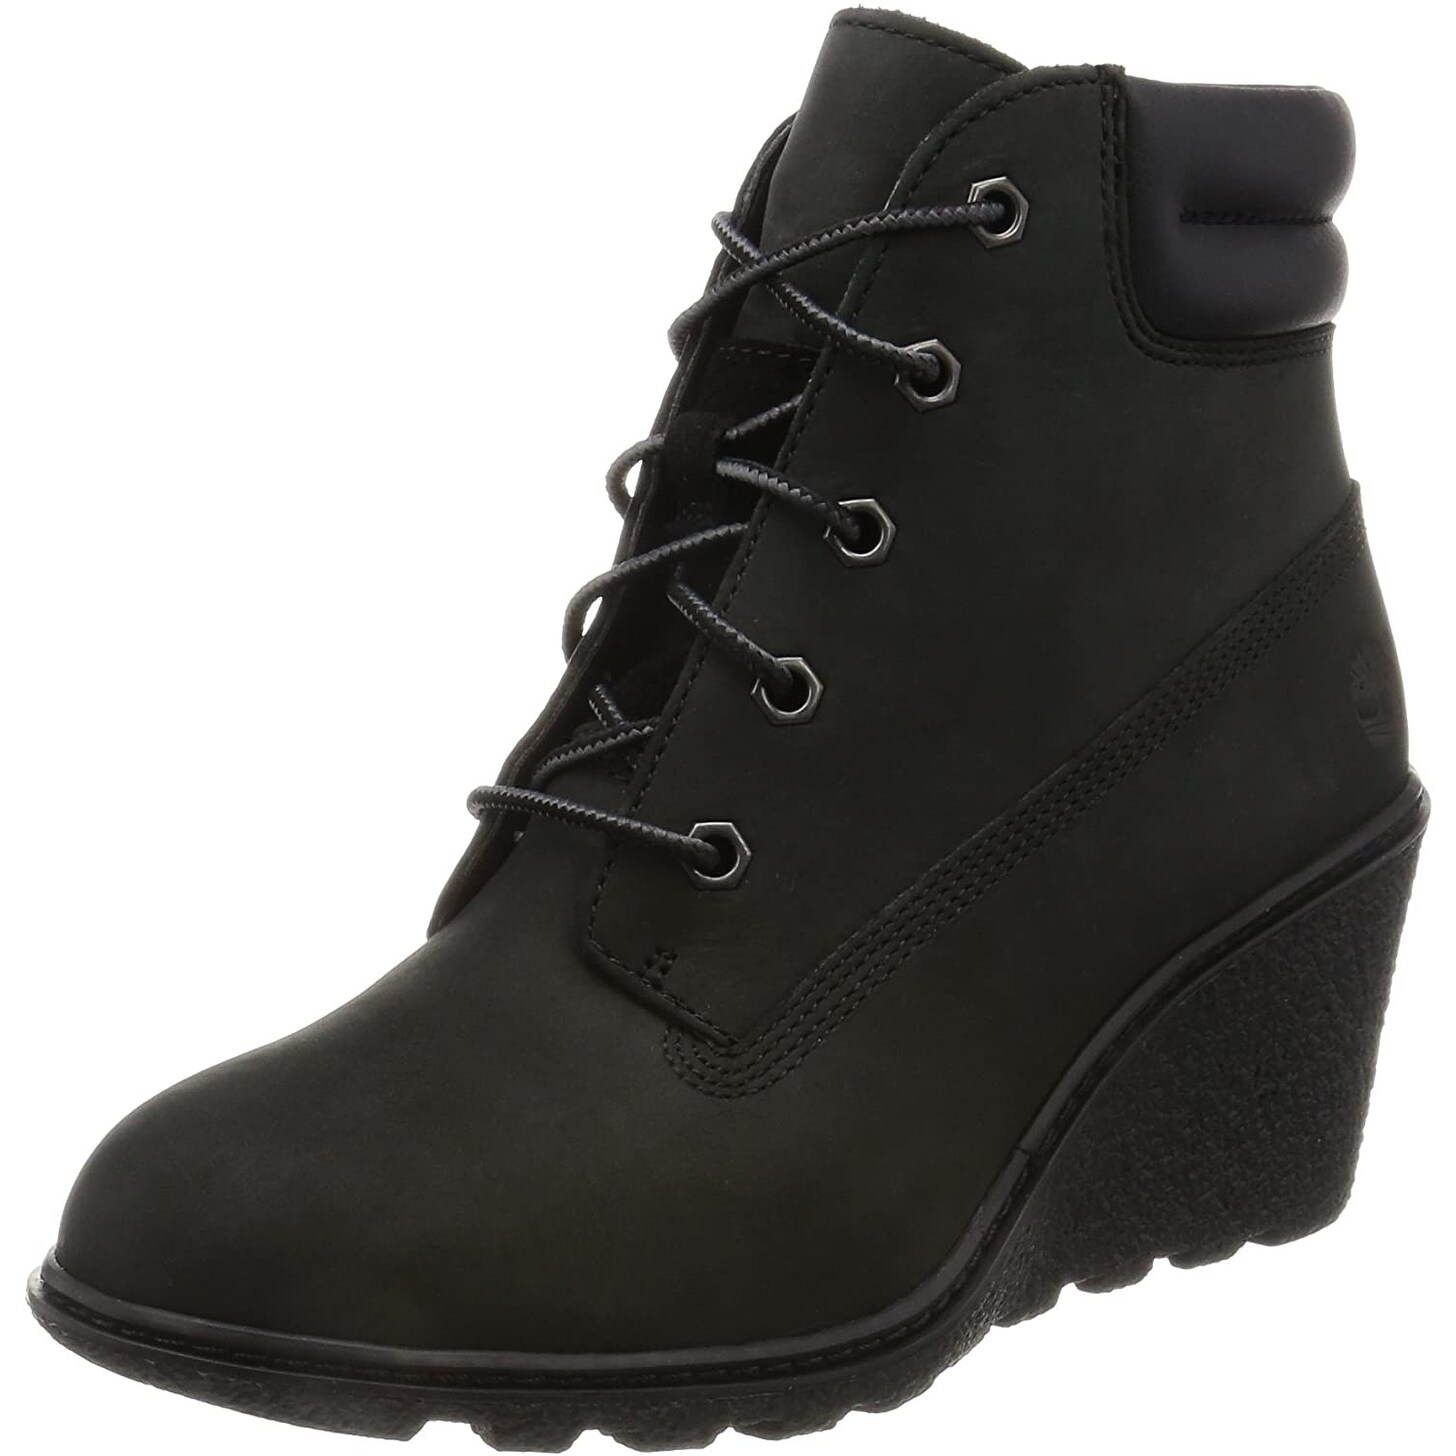 Boot Ankle - 8.5 - Overstock - 31607602